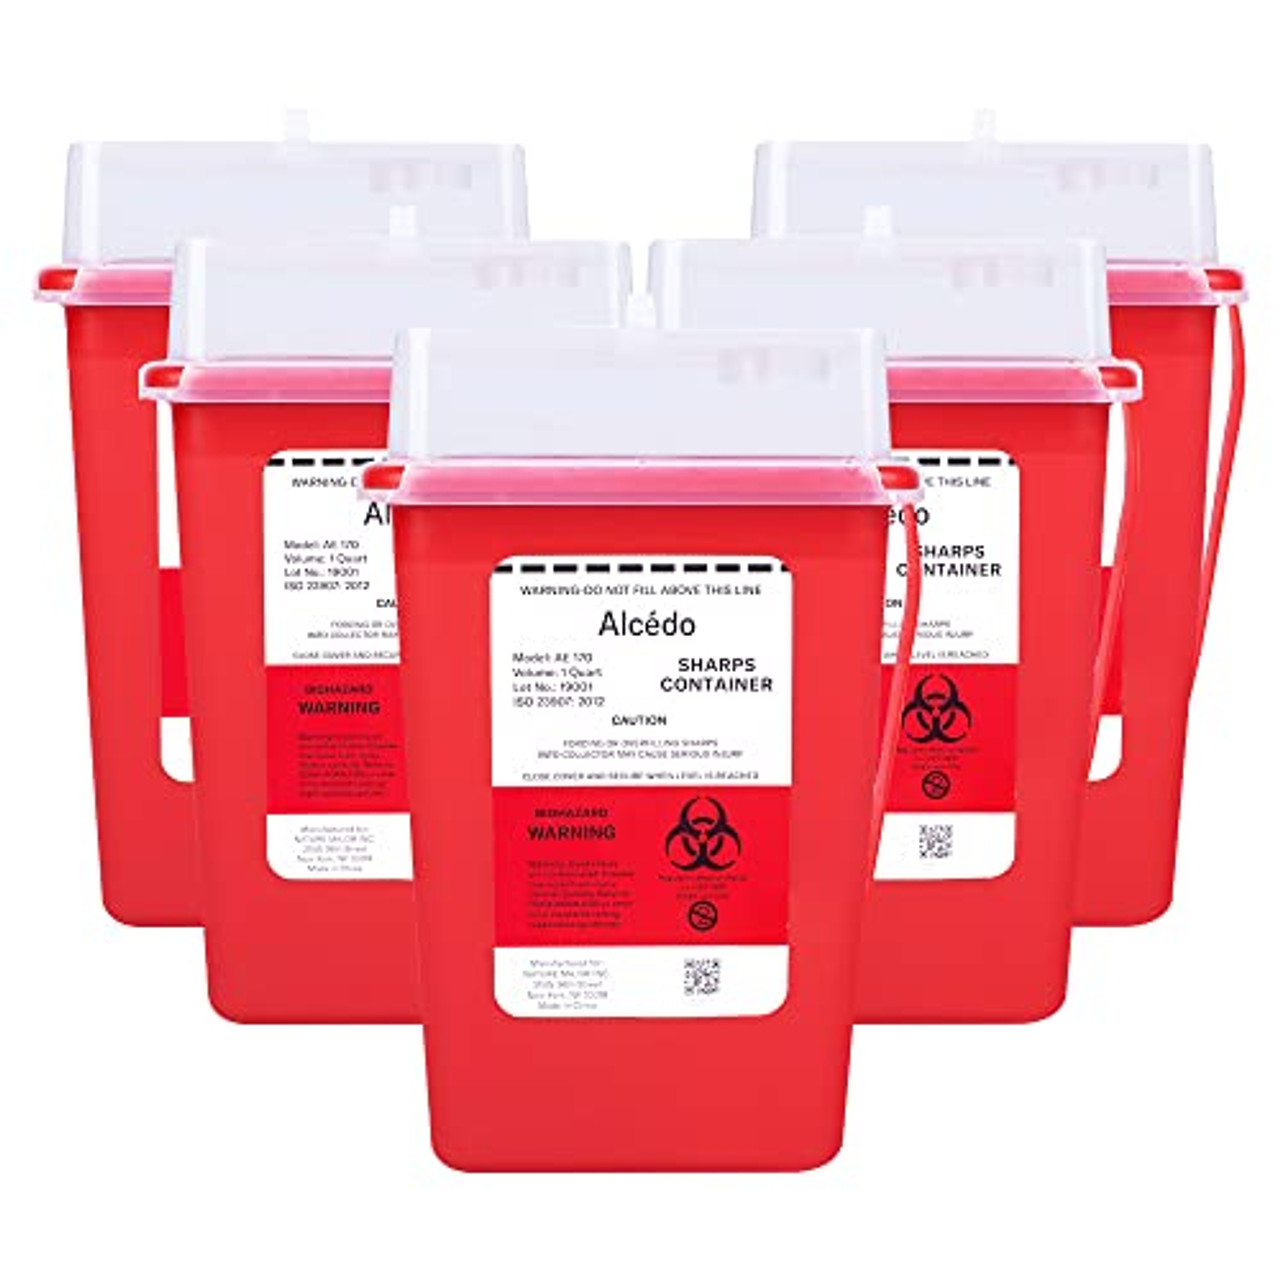 Alcedo Sharps Container for Home Use and Professional 1 Quart (5-Pack),  Biohazard Needle and Syringe Disposal, Small Portable Container for Travel